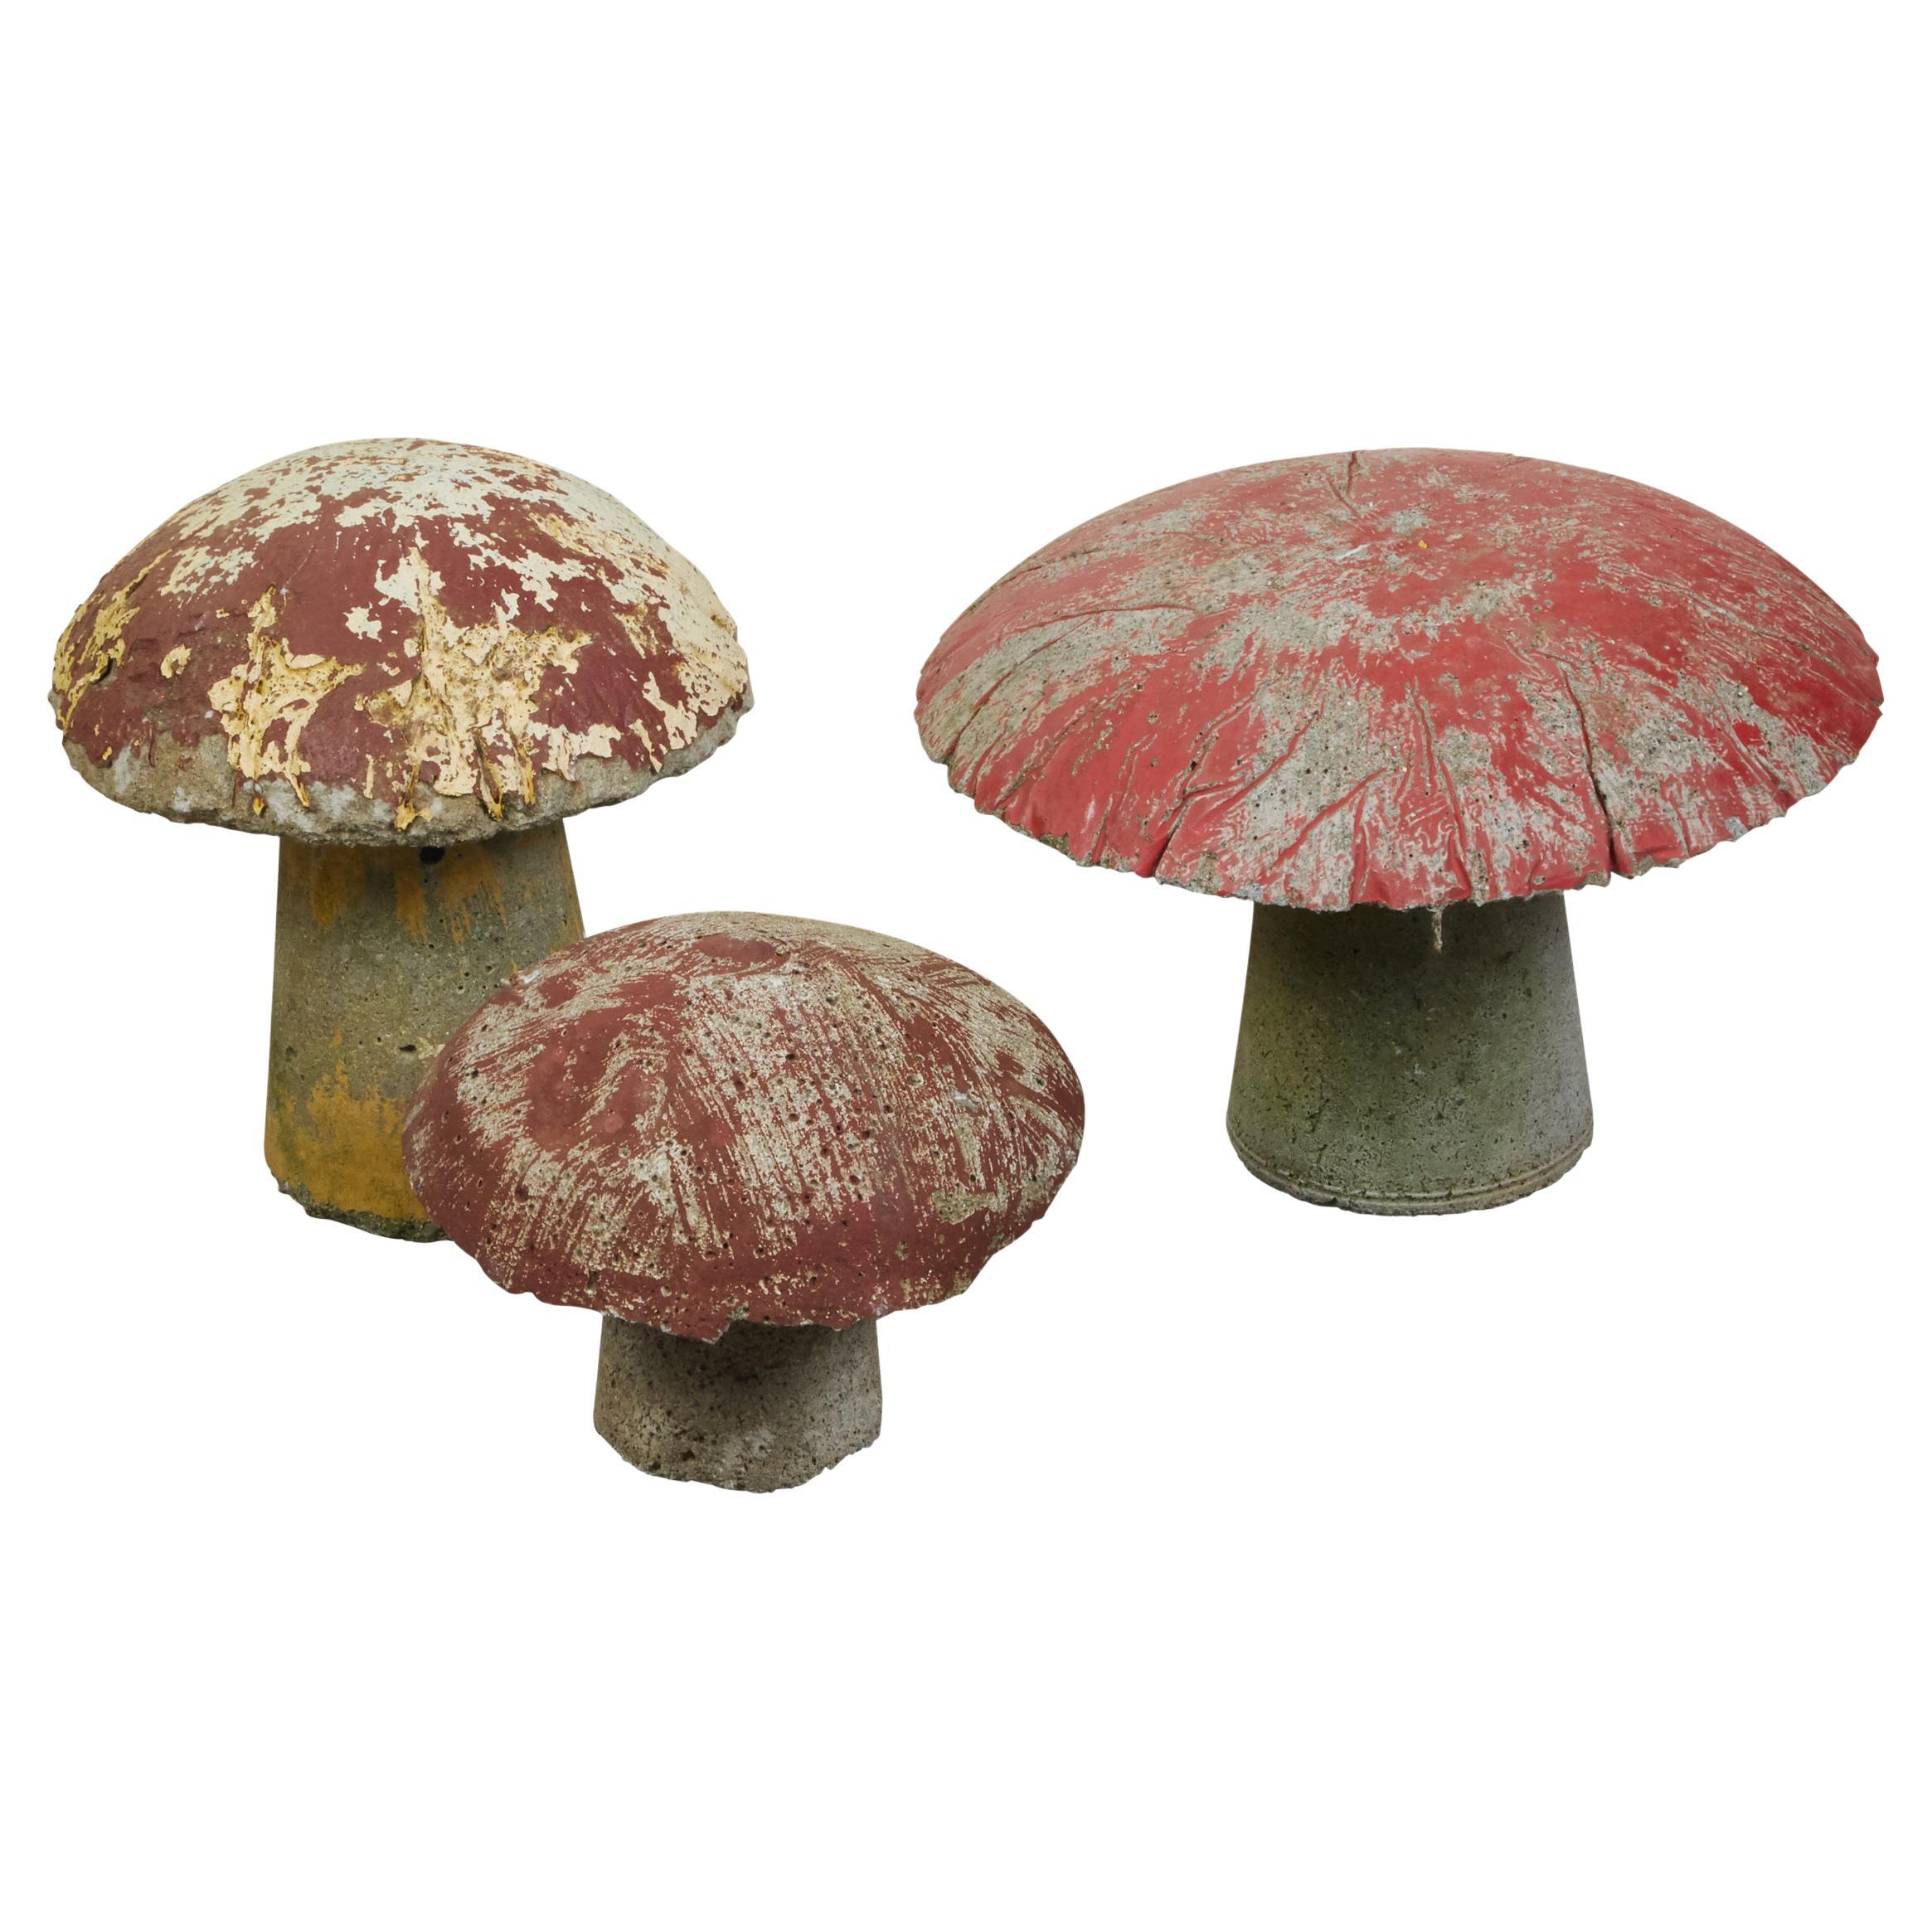 Set of Three American Midcentury Concrete Mushrooms with Weathered Appearance